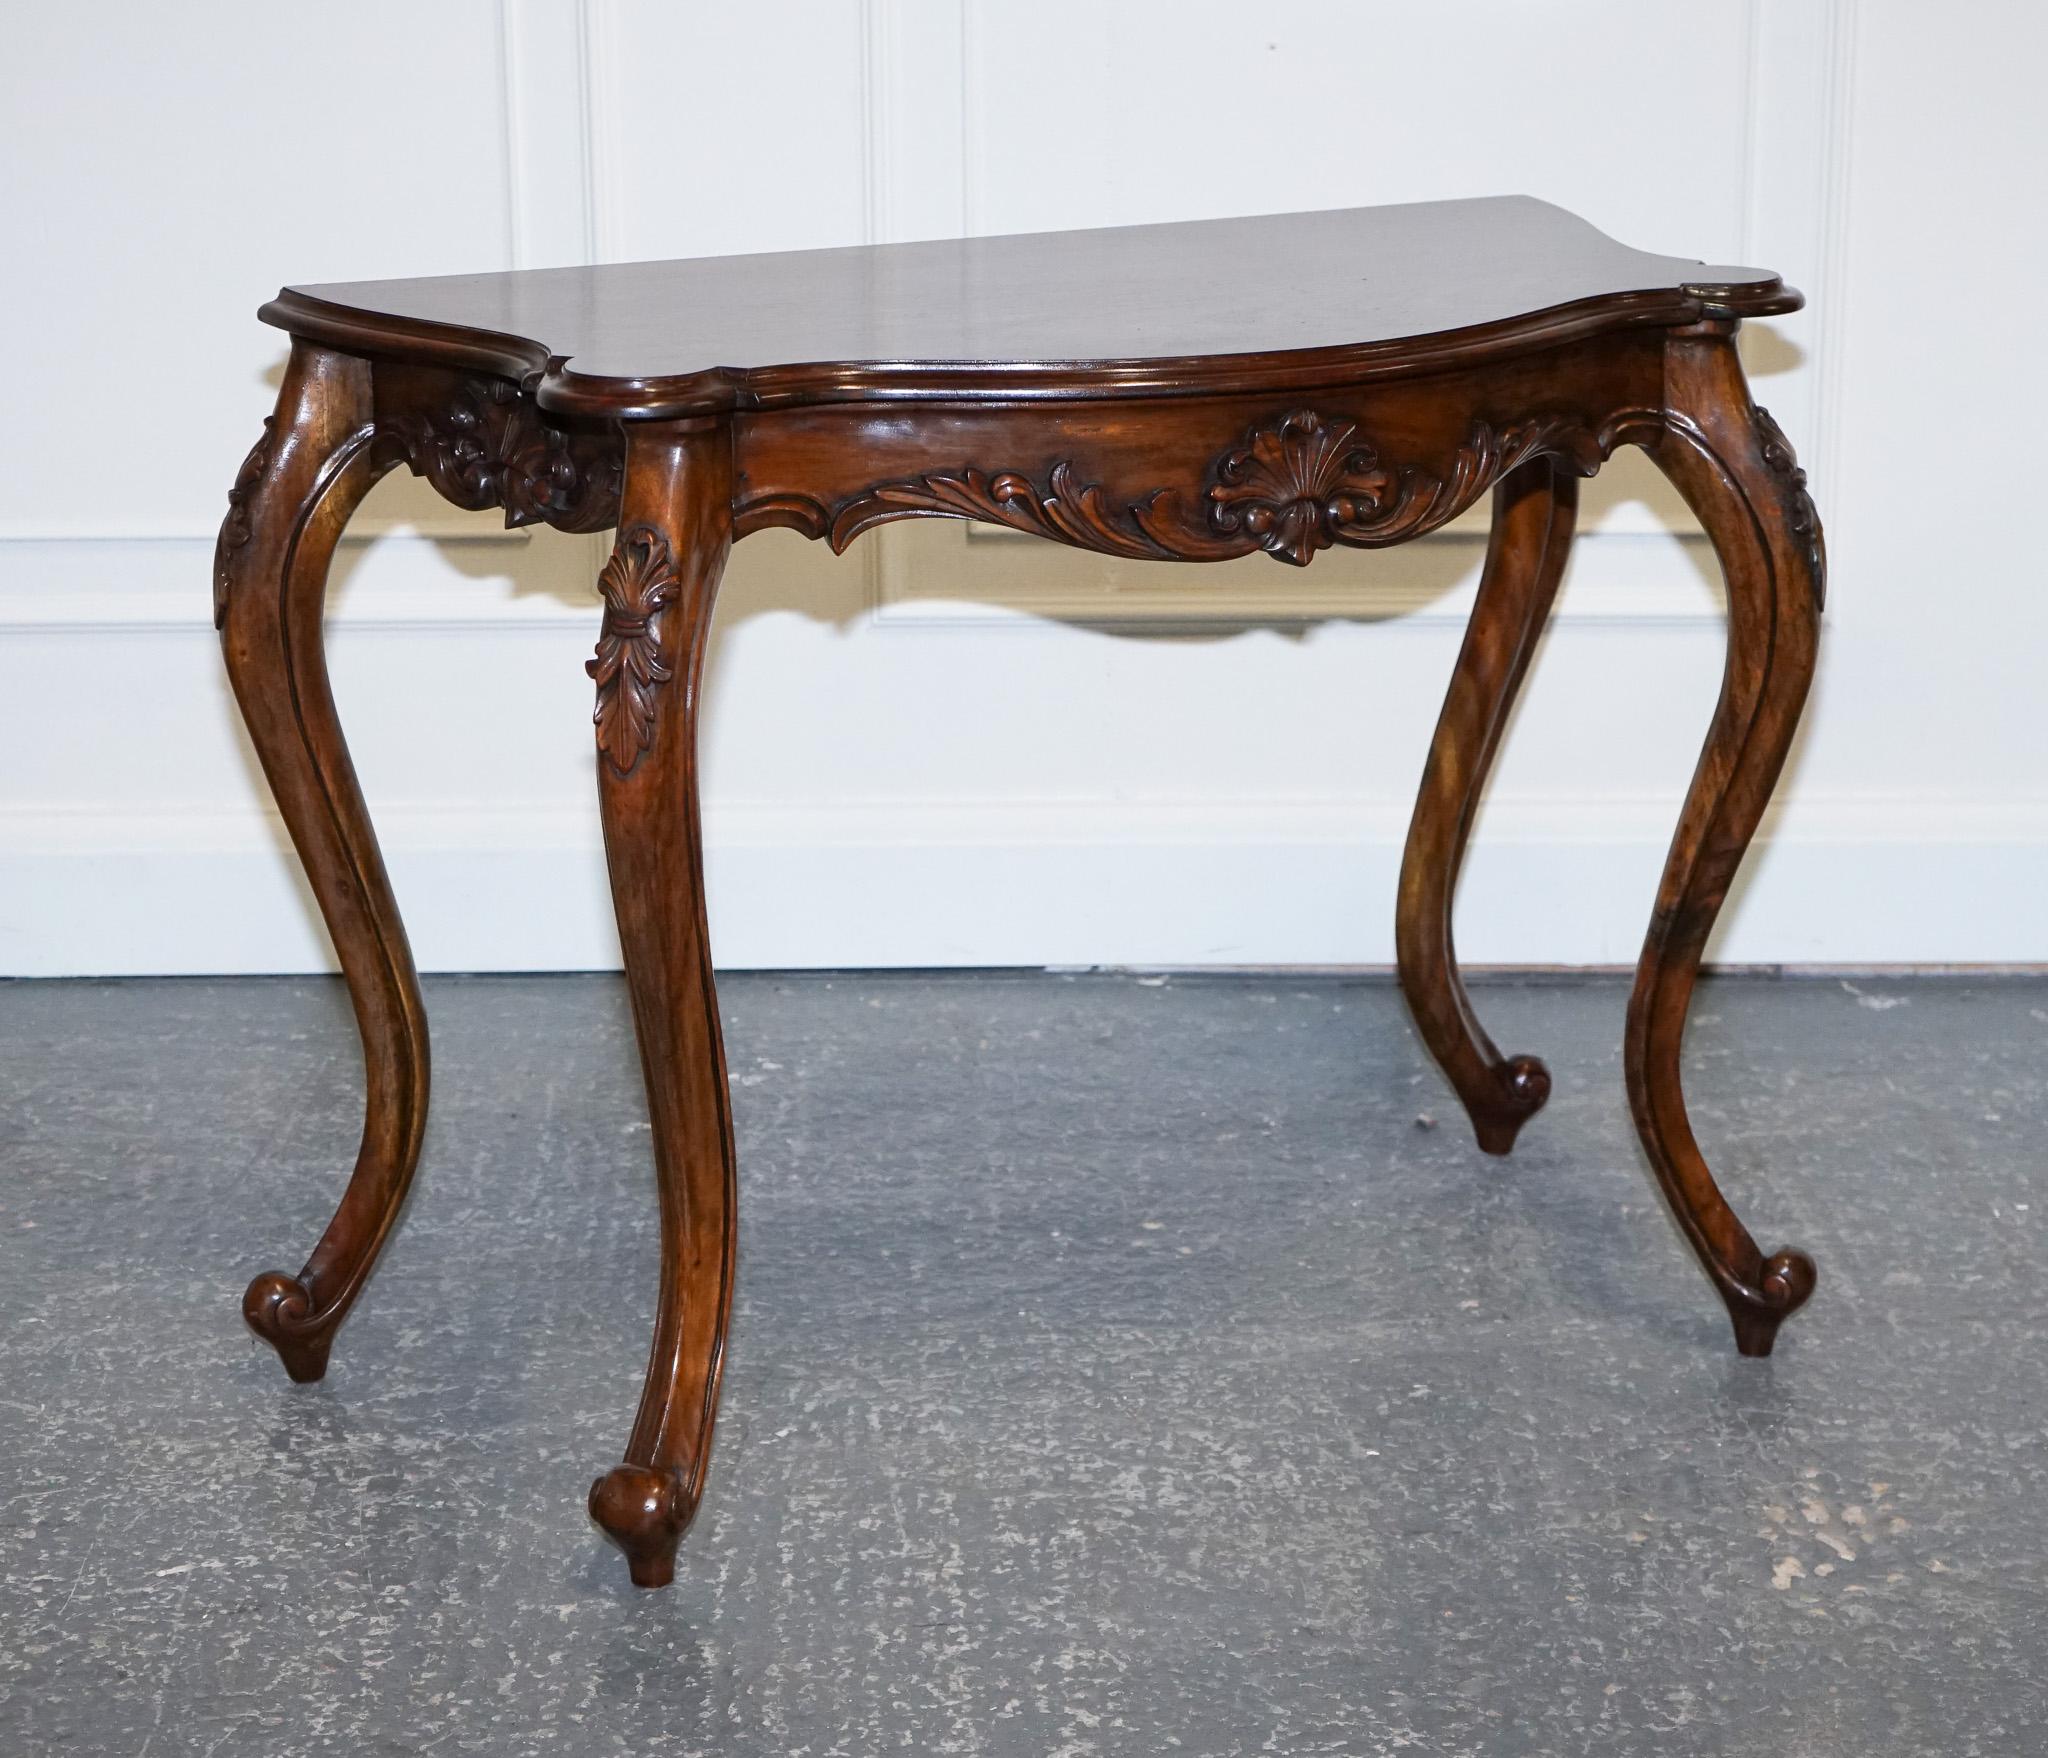 We are delighted to offer for sale this Lovely Late 19th-century French Carved Console Table.

This French-carved console table is a stunning piece of furniture that will add elegance and charm to any room.

The table features a carved apron